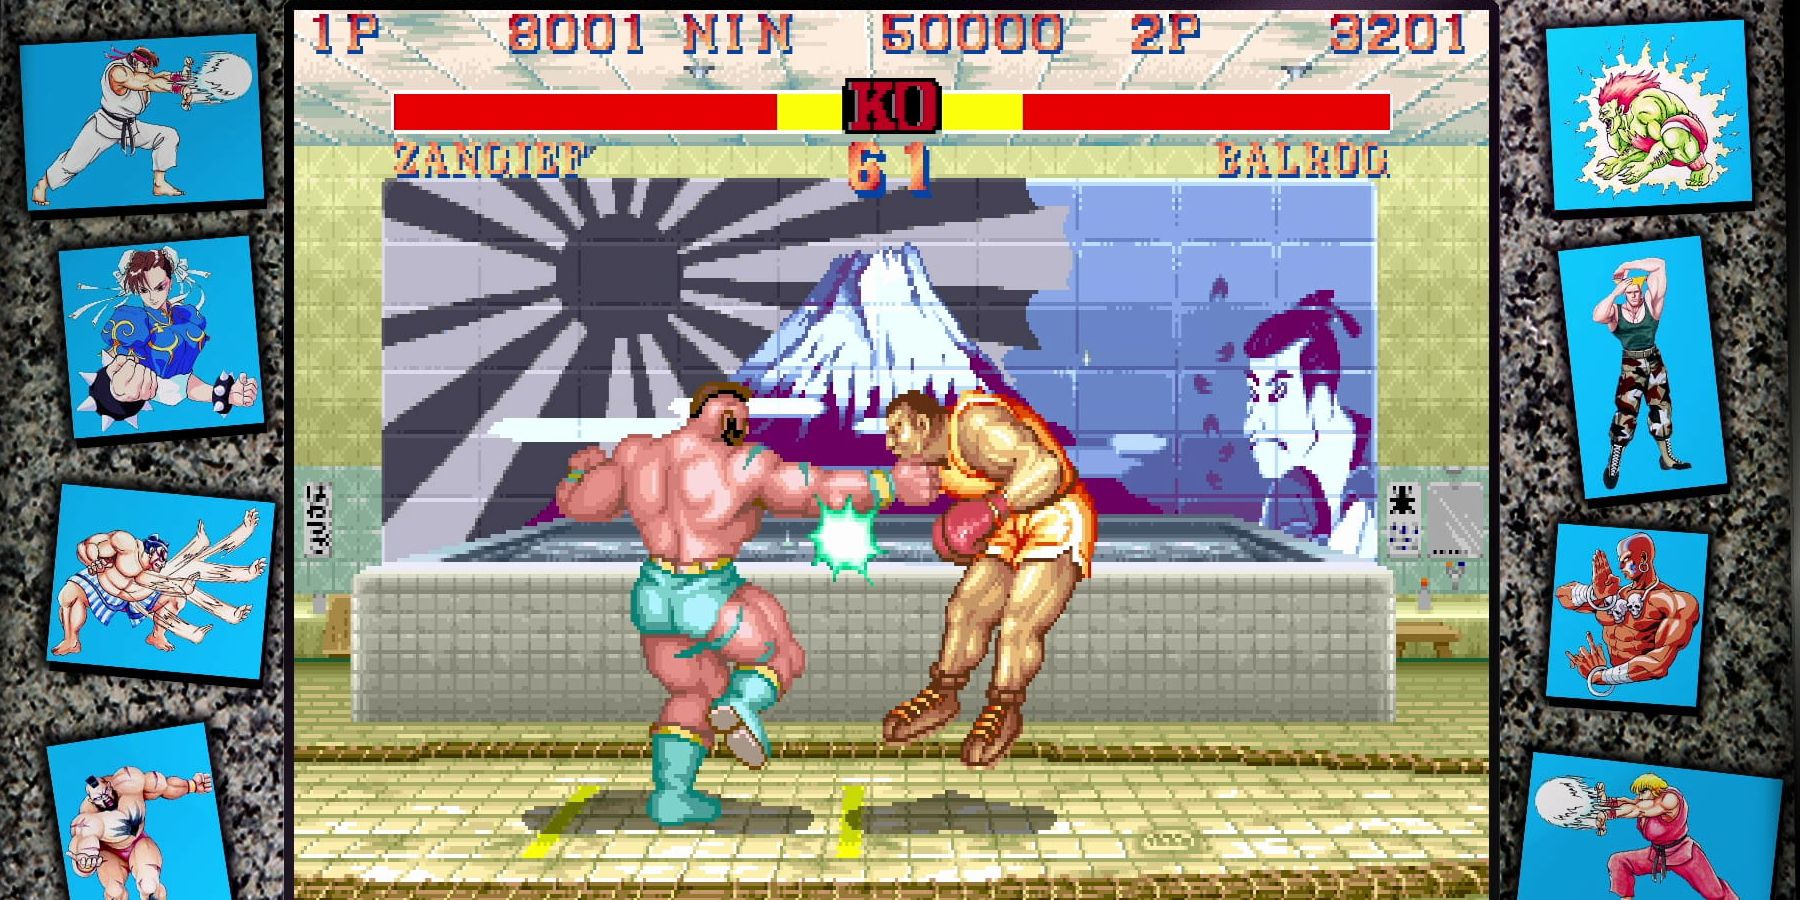 Zangief uses his Lariat against Balrog in Street Fighter II Turbo: Hyper Fighting